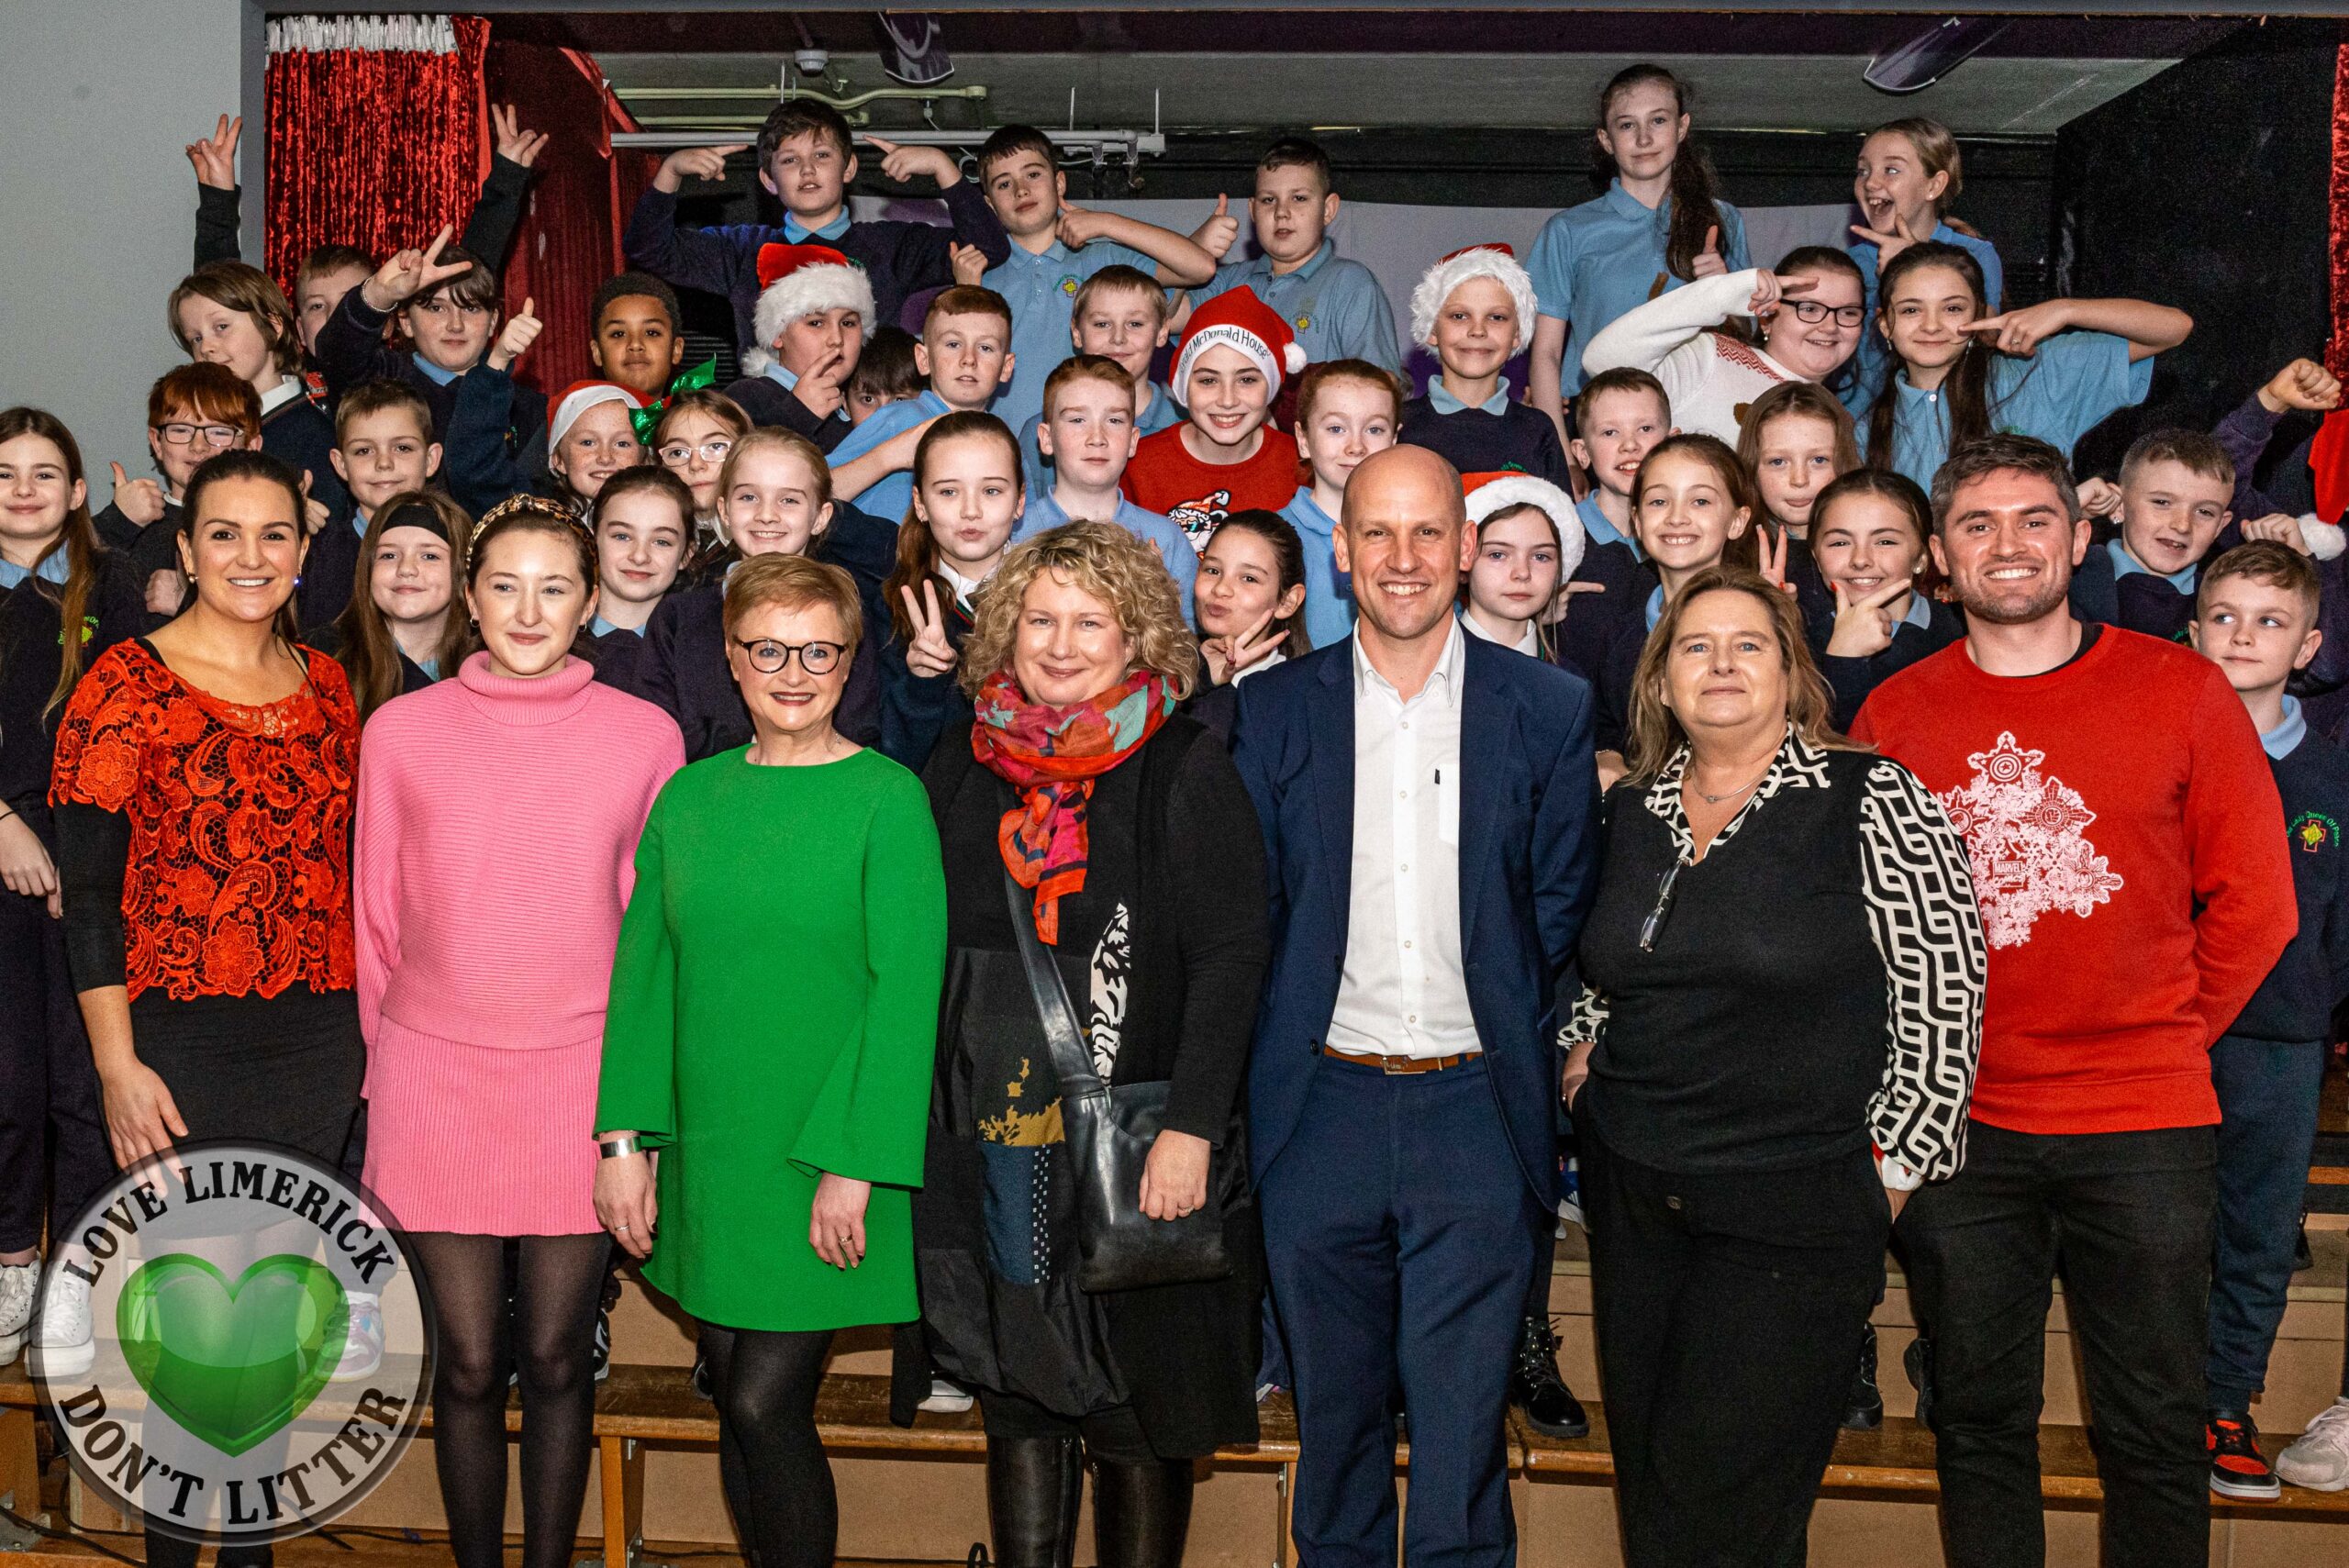 Our Lady Queen of Peace School Choir 'Choirs for Christmas' primary school winners with heart-warming Dolores O'Riordan tribute